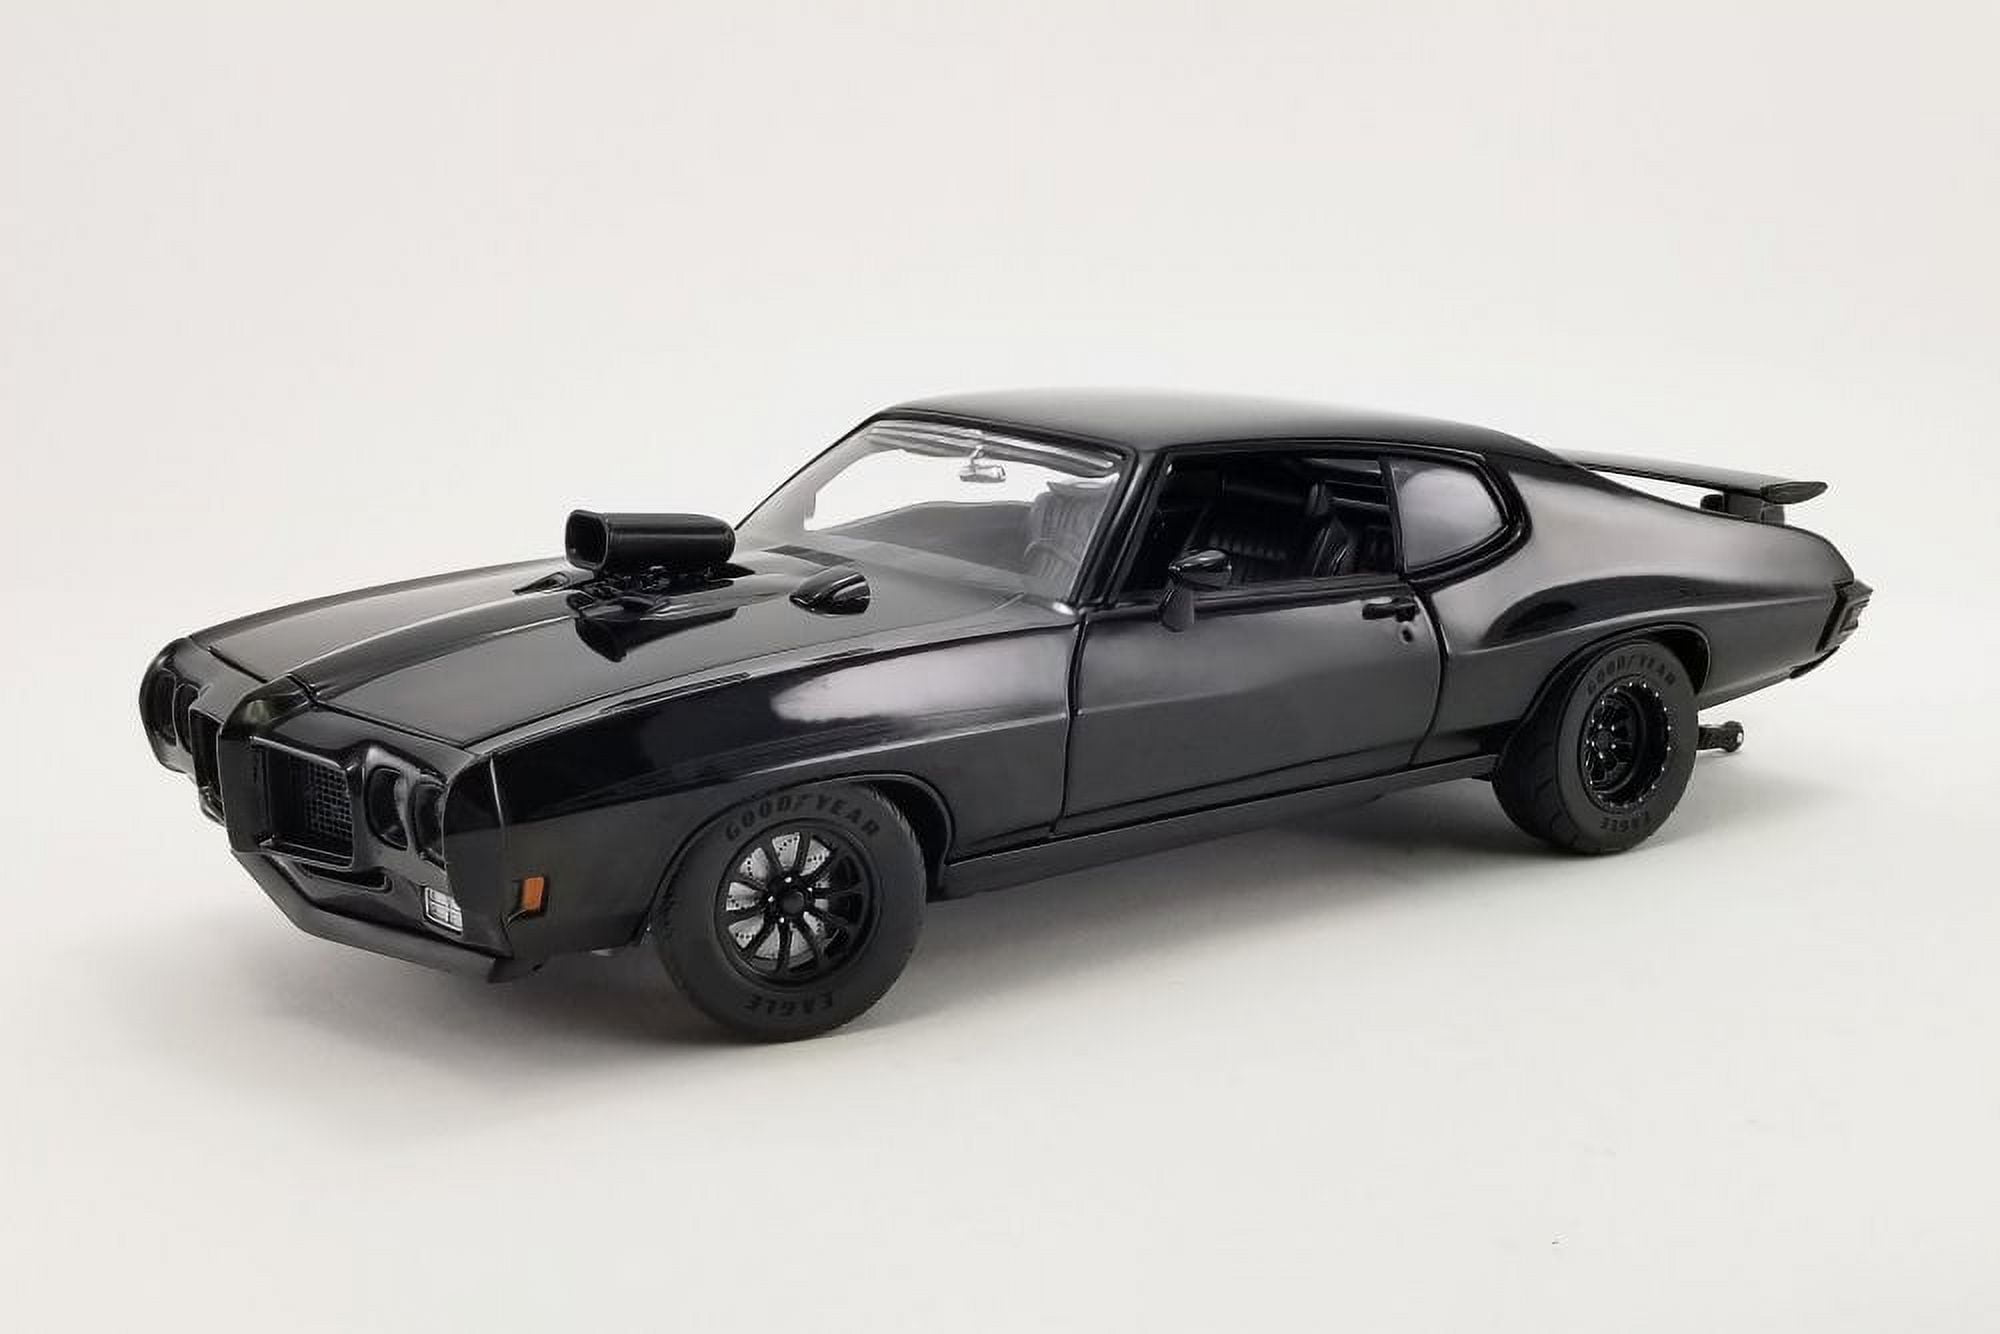 Picture of ACME A1801217 Black Drag Outlaws Series Limited Edition to 564 Pieces Worldwide 1 by 18 Scale Diecast Model Car for 1970 Pontiac GTO Judge Justified